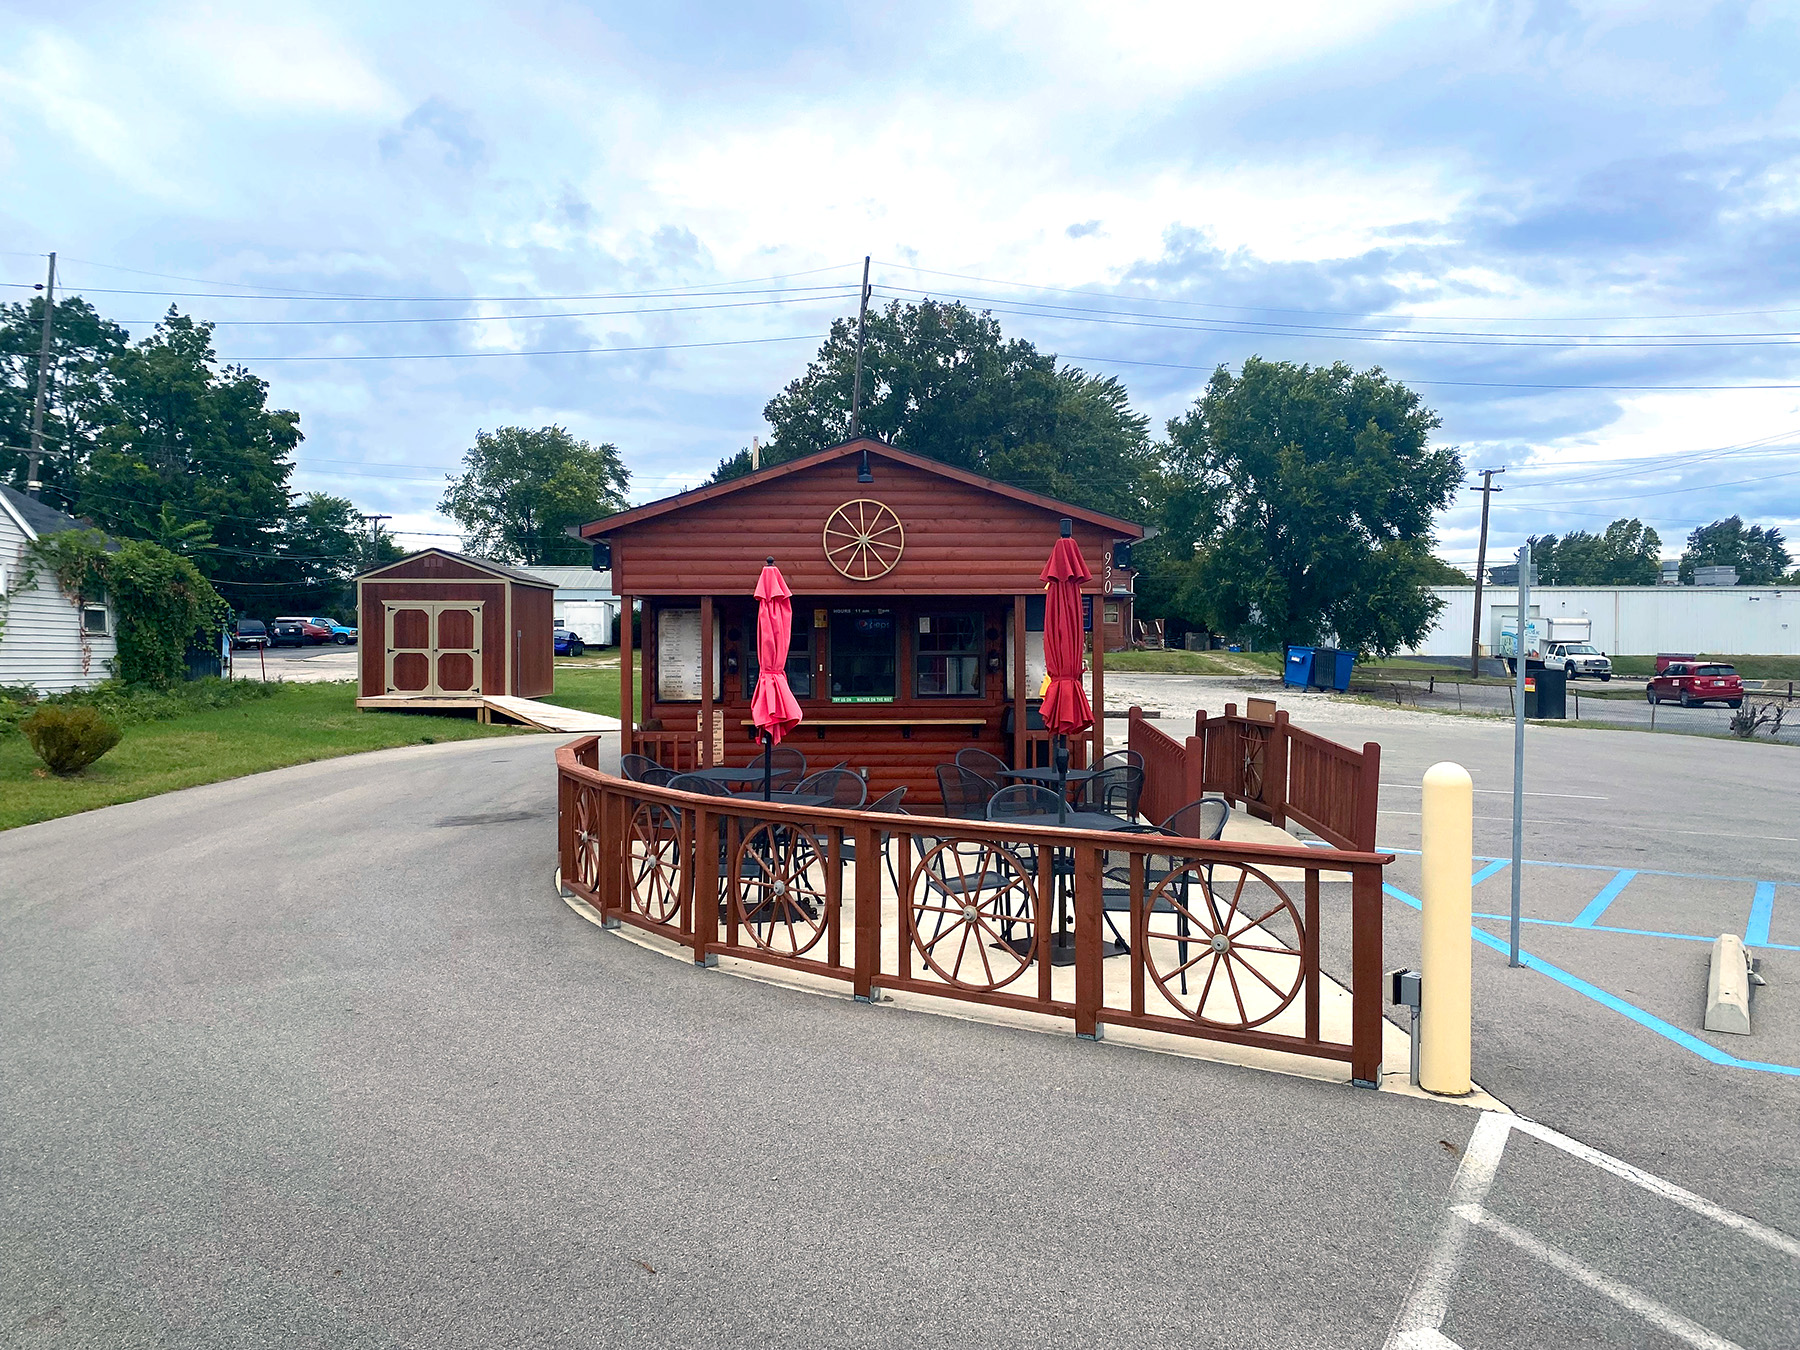 Sturges Property Group - Restaurant Retail Space For Sale in Fort Wayne Indiana Major Thoroughfare